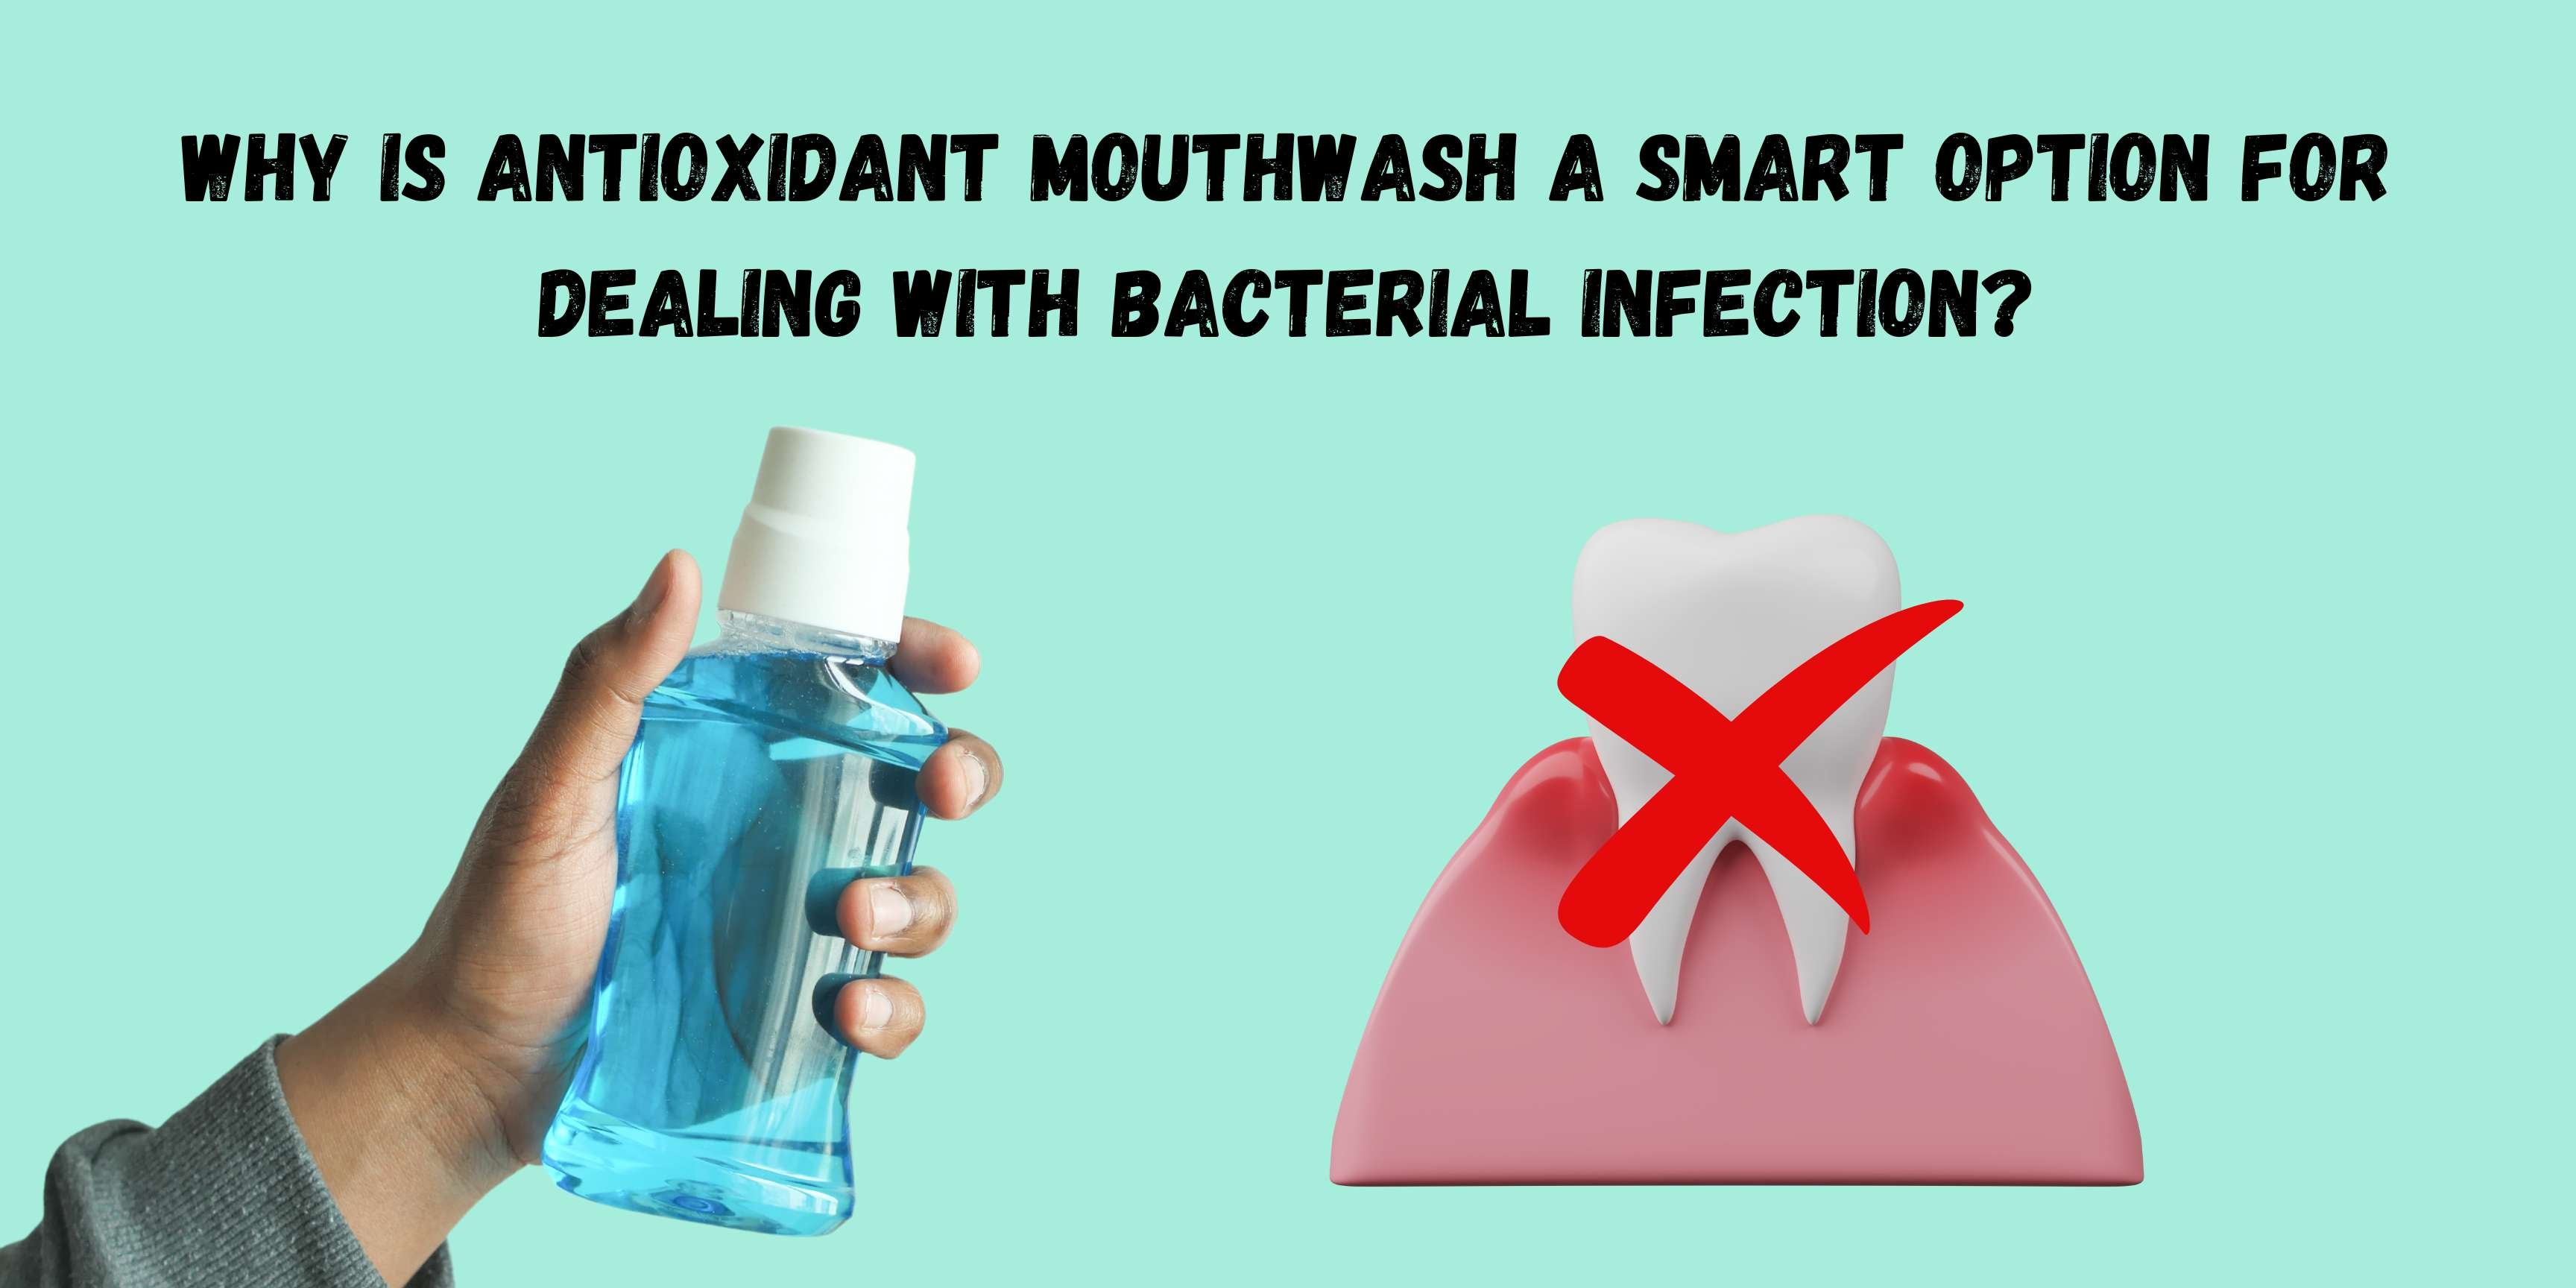 Why is Antioxidant Mouthwash a Smart Option for Dealing with Bacterial Infection